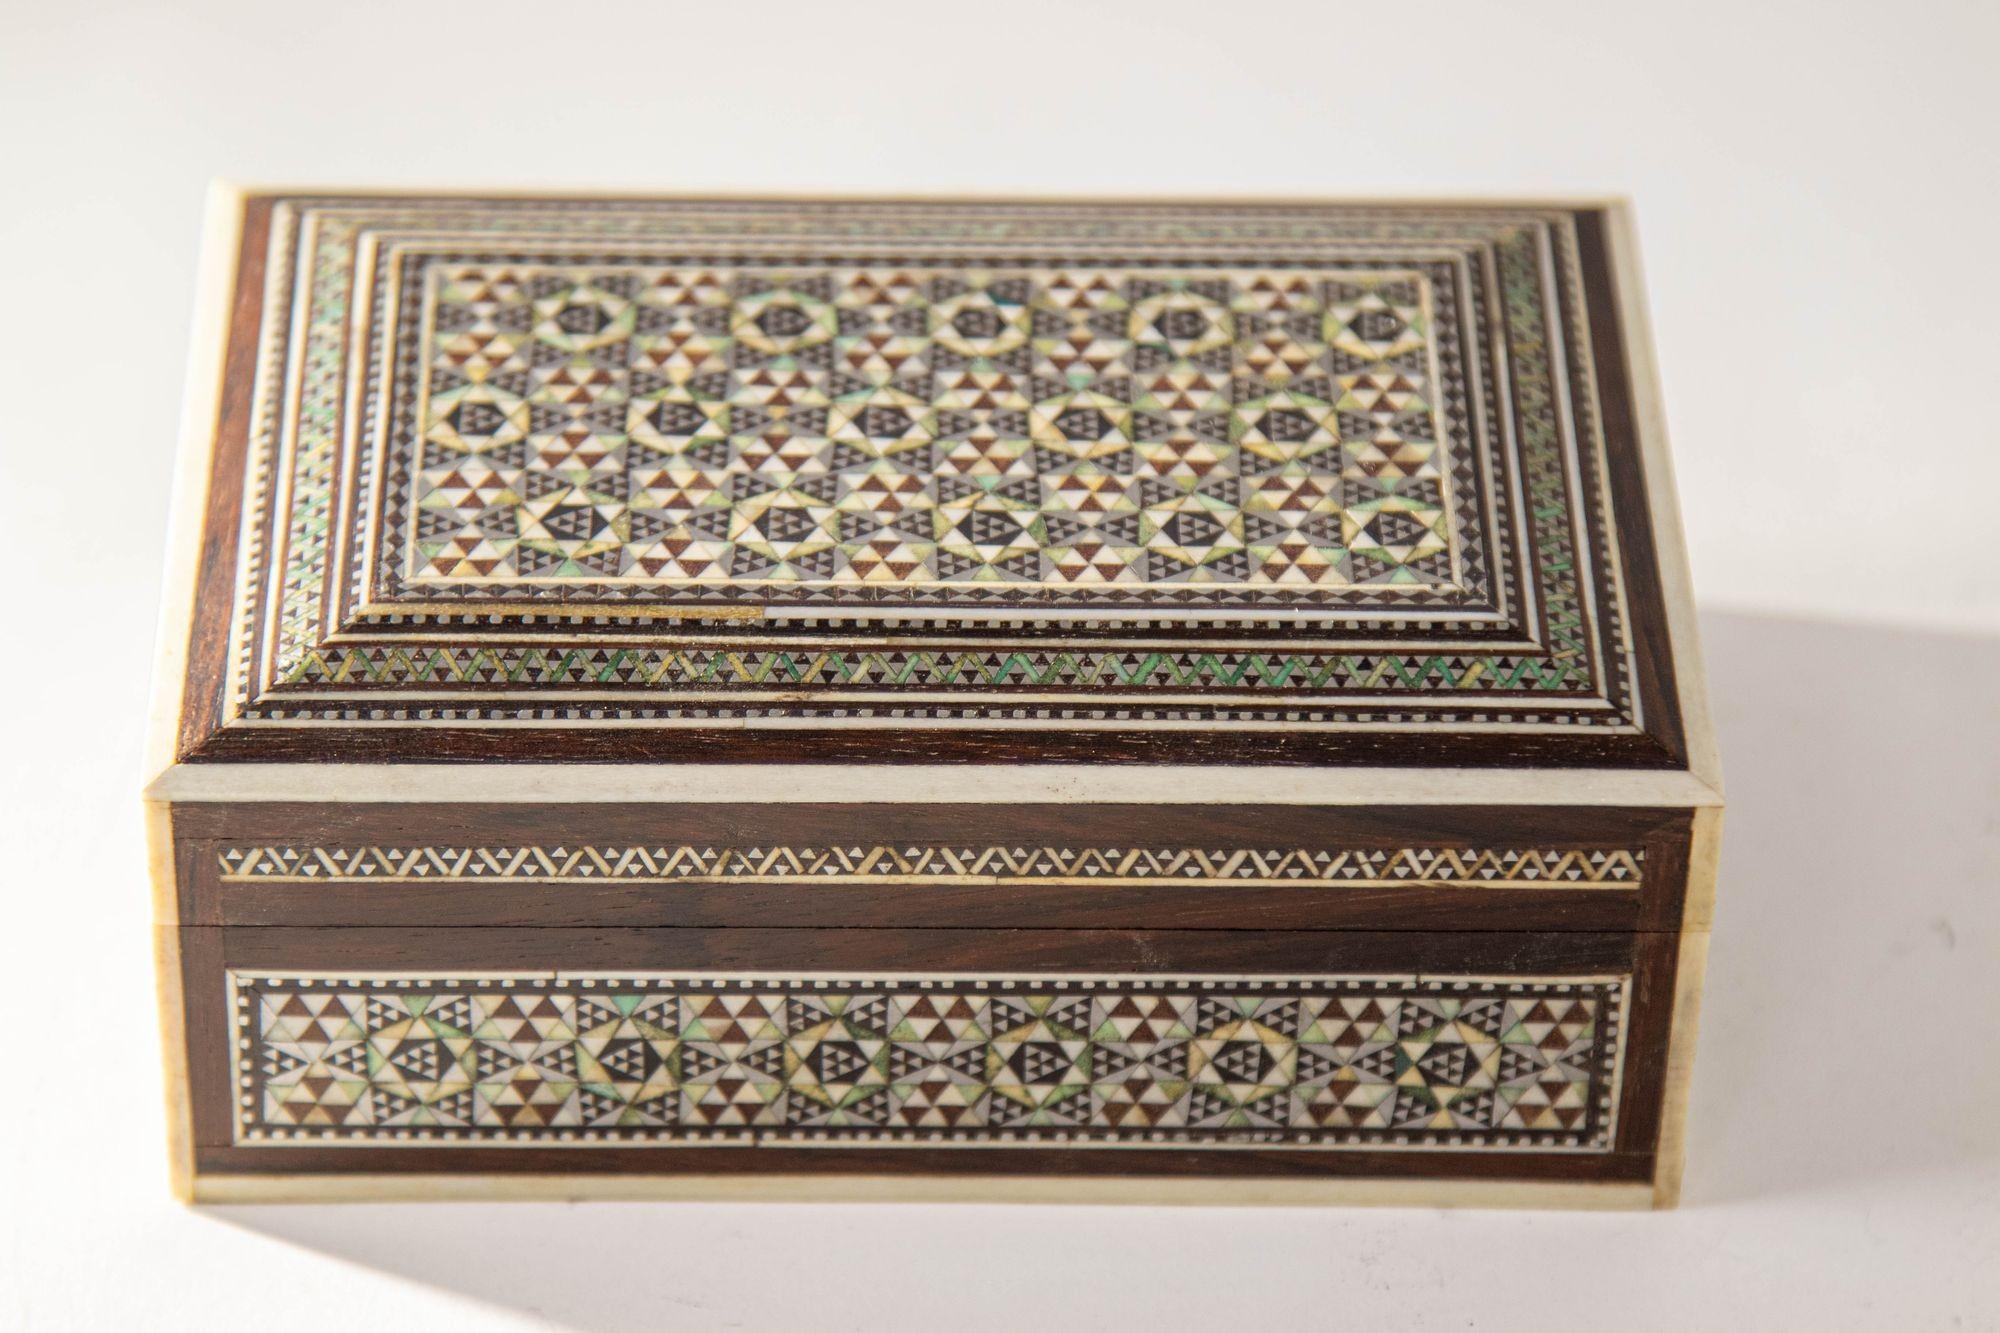 Vintage 1940s Mosaic Mother of Pearl Inlaid Decorative Middle Eastern Islamic Box.
Mosaic Luxury Decorative Middle Eastern Islamic Vanity Box.
Middle Eastern Asian Mosaic Wood Box with Inlays of Bone and Mother of Pearl, C. 1940s
Exquisite